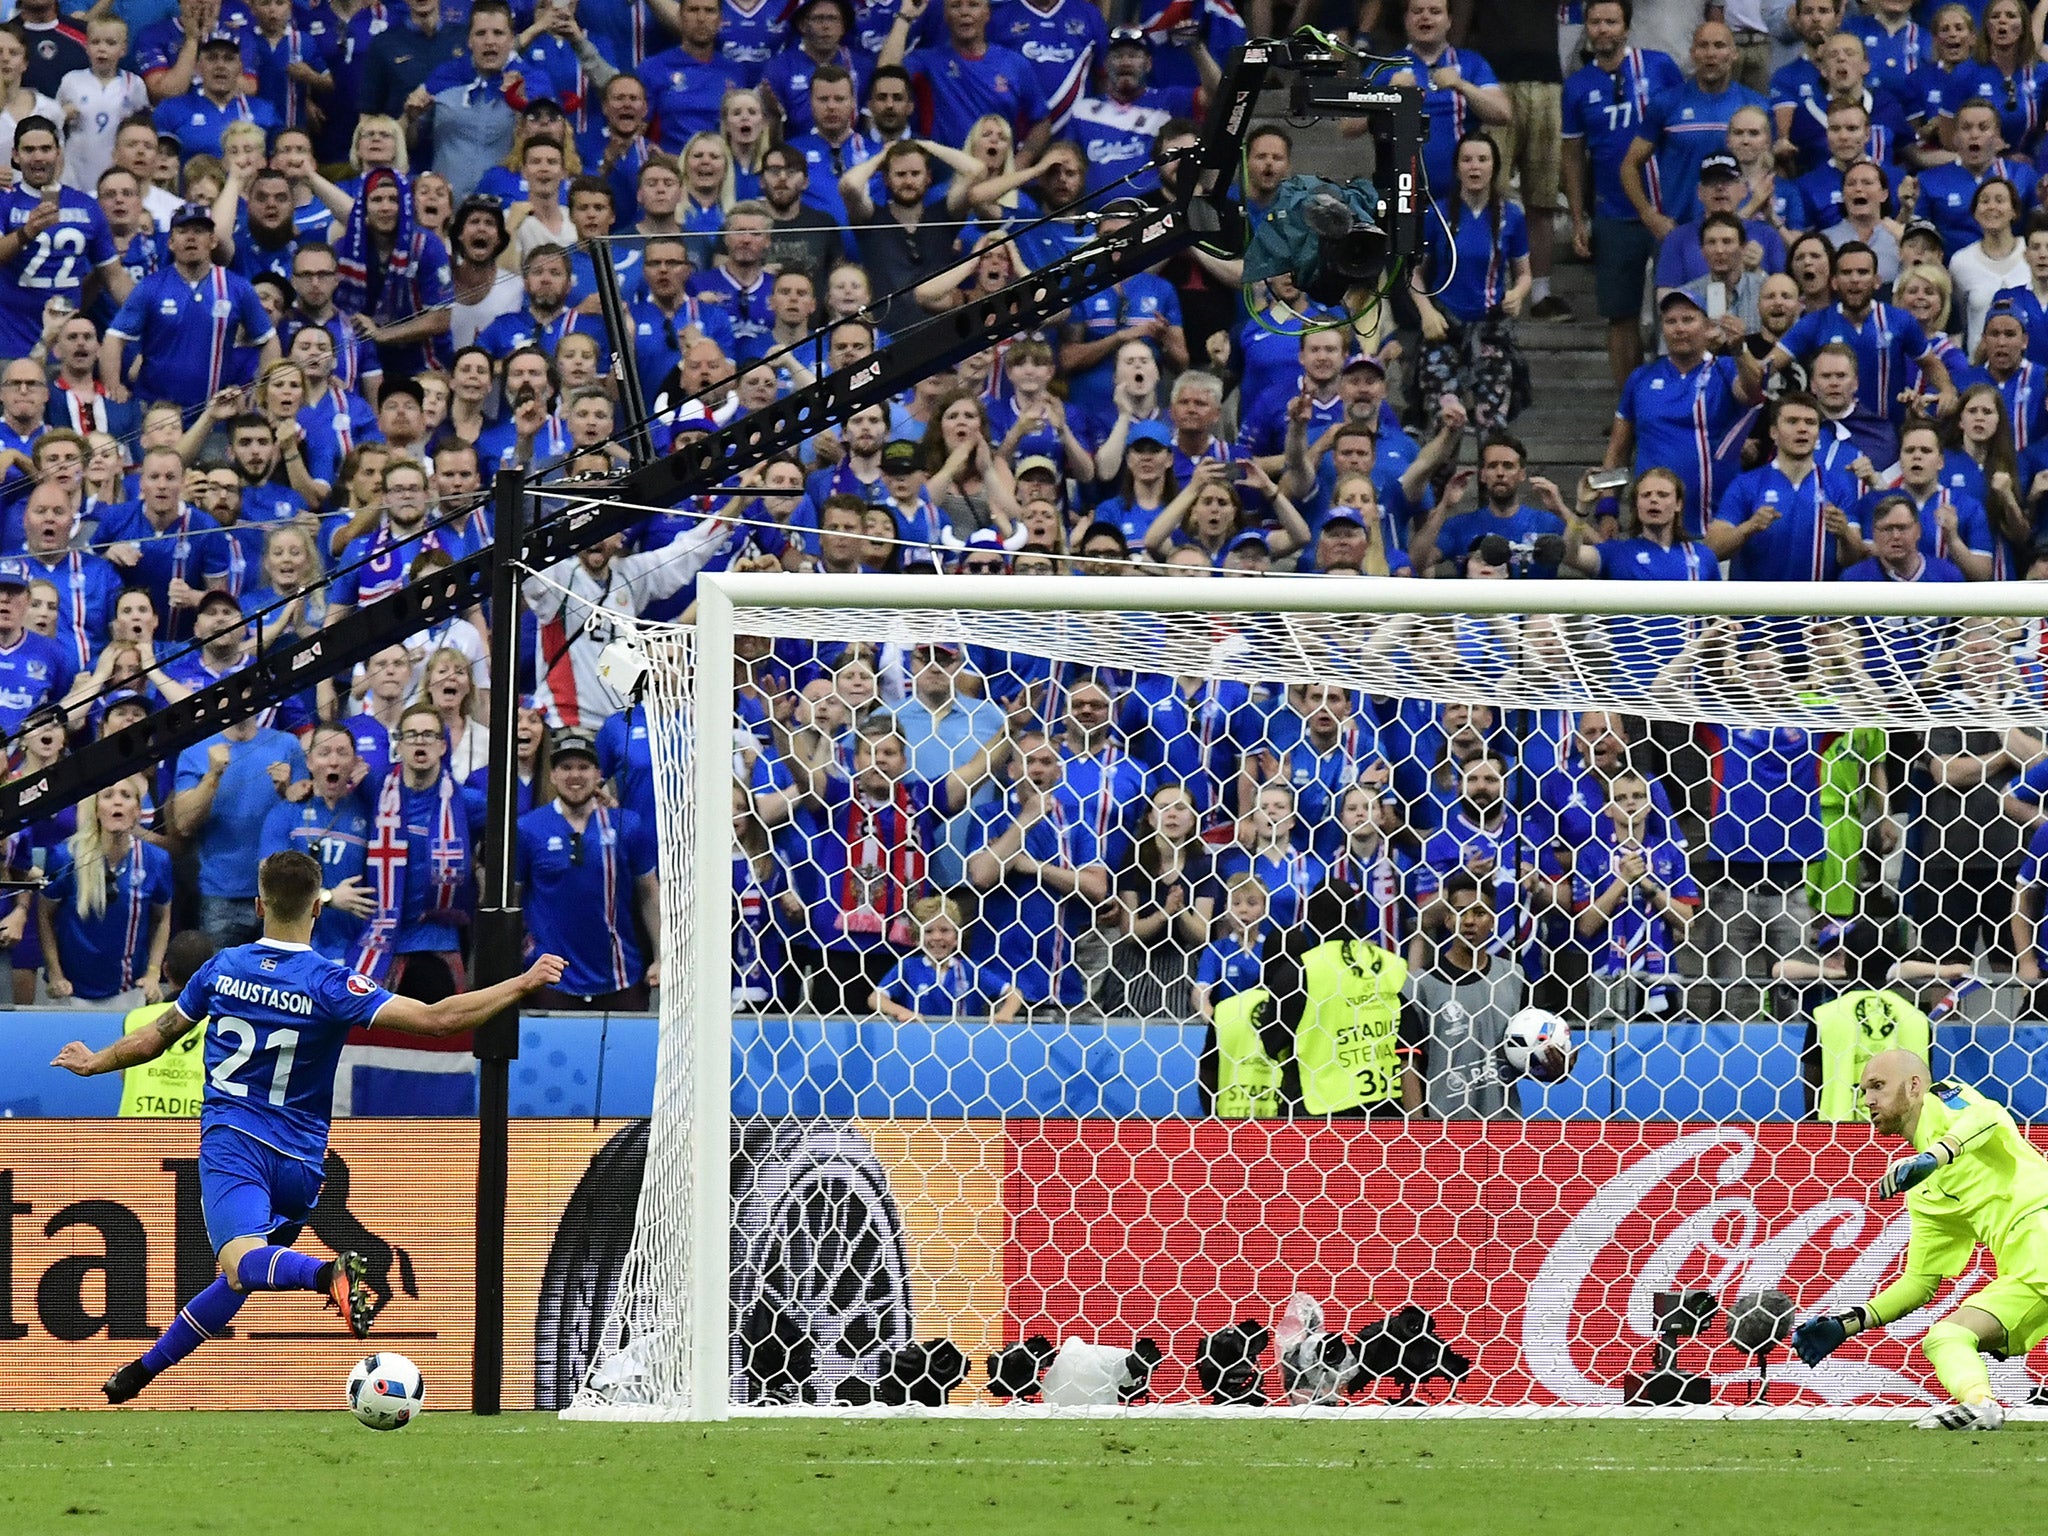 Arnor Ingvi Traustason shoots in the final minute of the match between Iceland and Austria